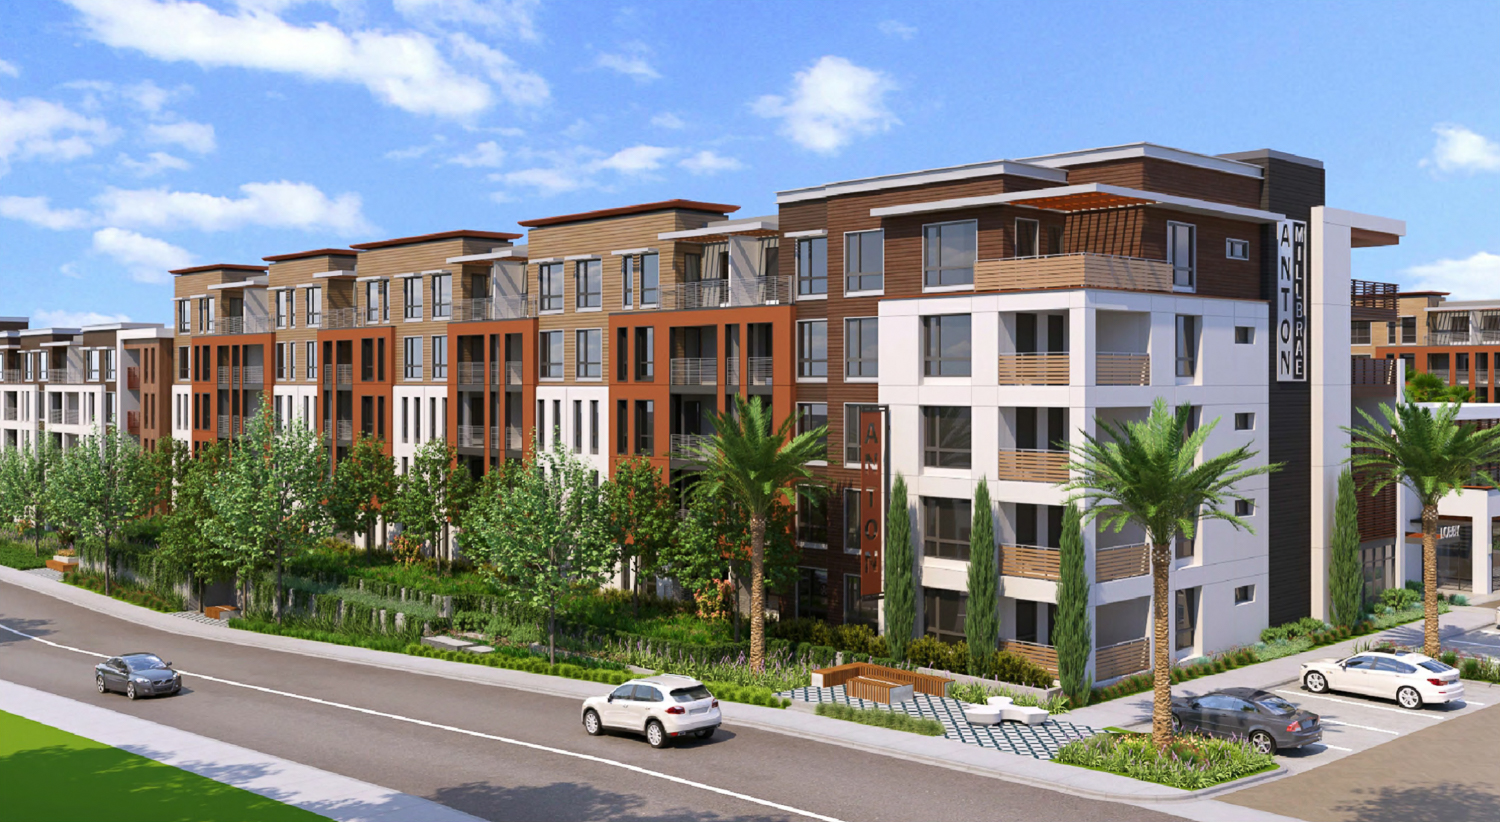 1100 El Camino Real aerial view, rendering by KTGY Group